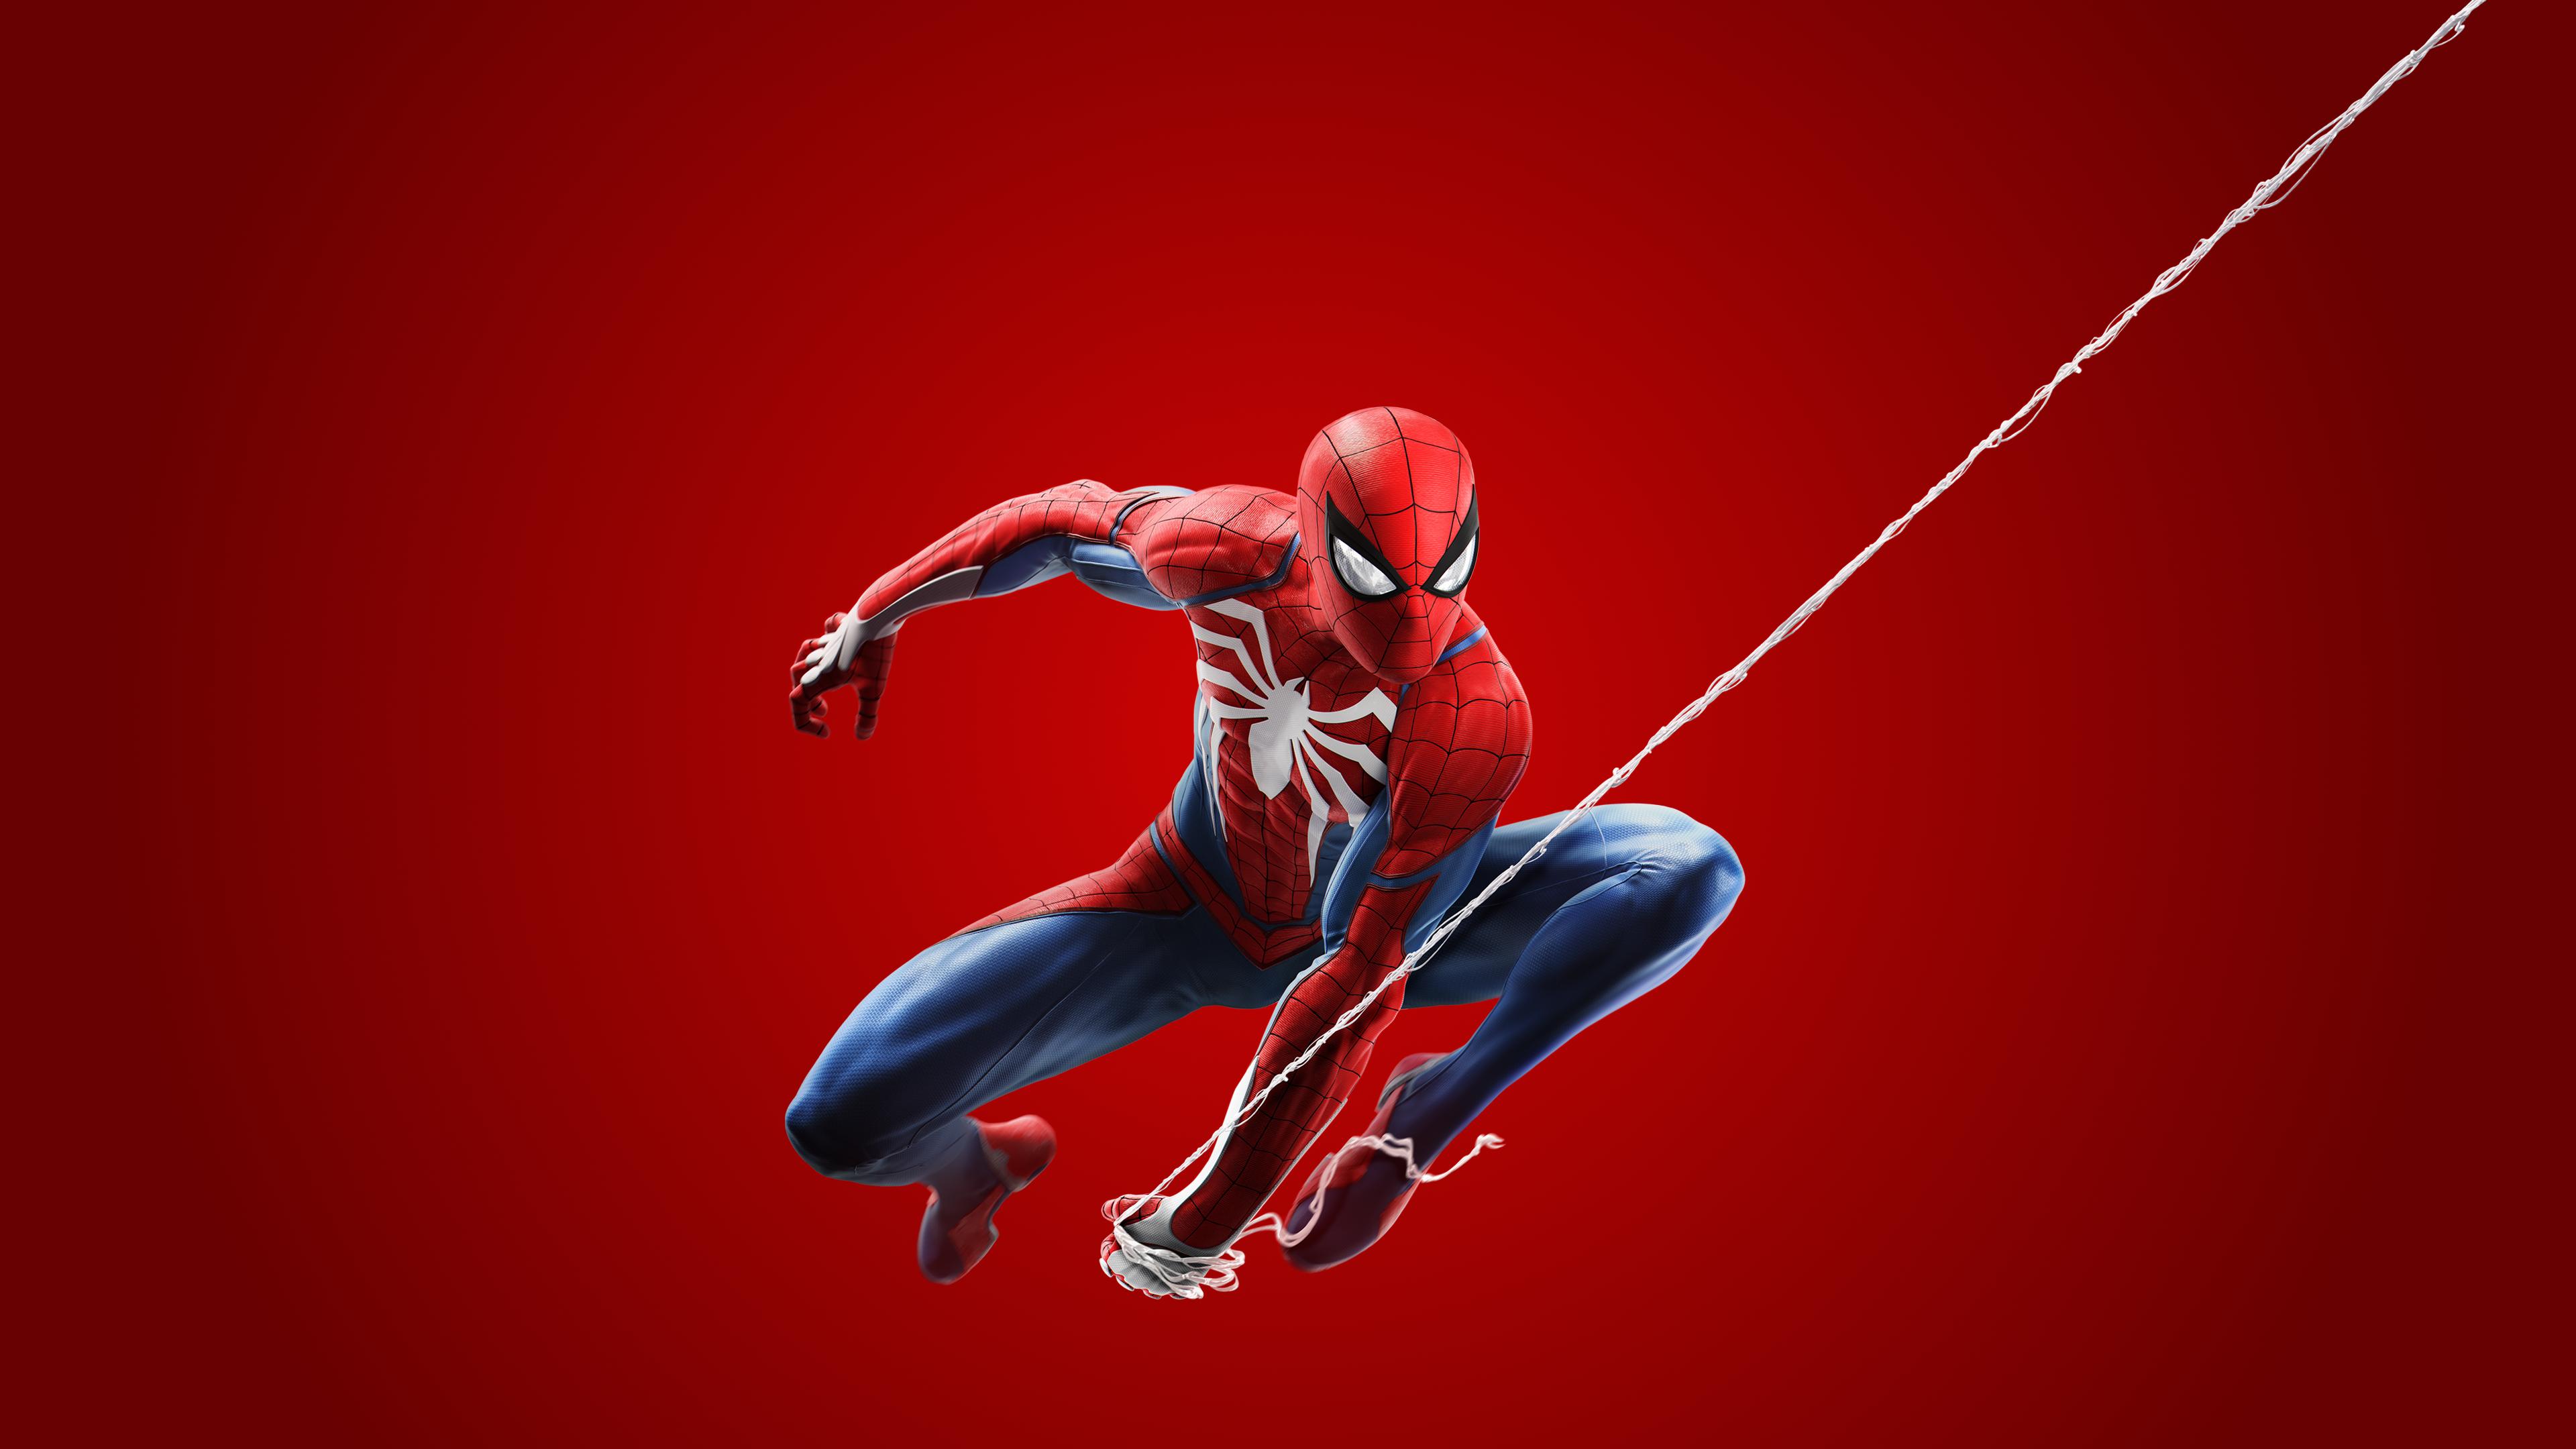 3840 x 2160 · png - 4K wallpaper of Spider-Man for PS4 (alternate version in comments ...